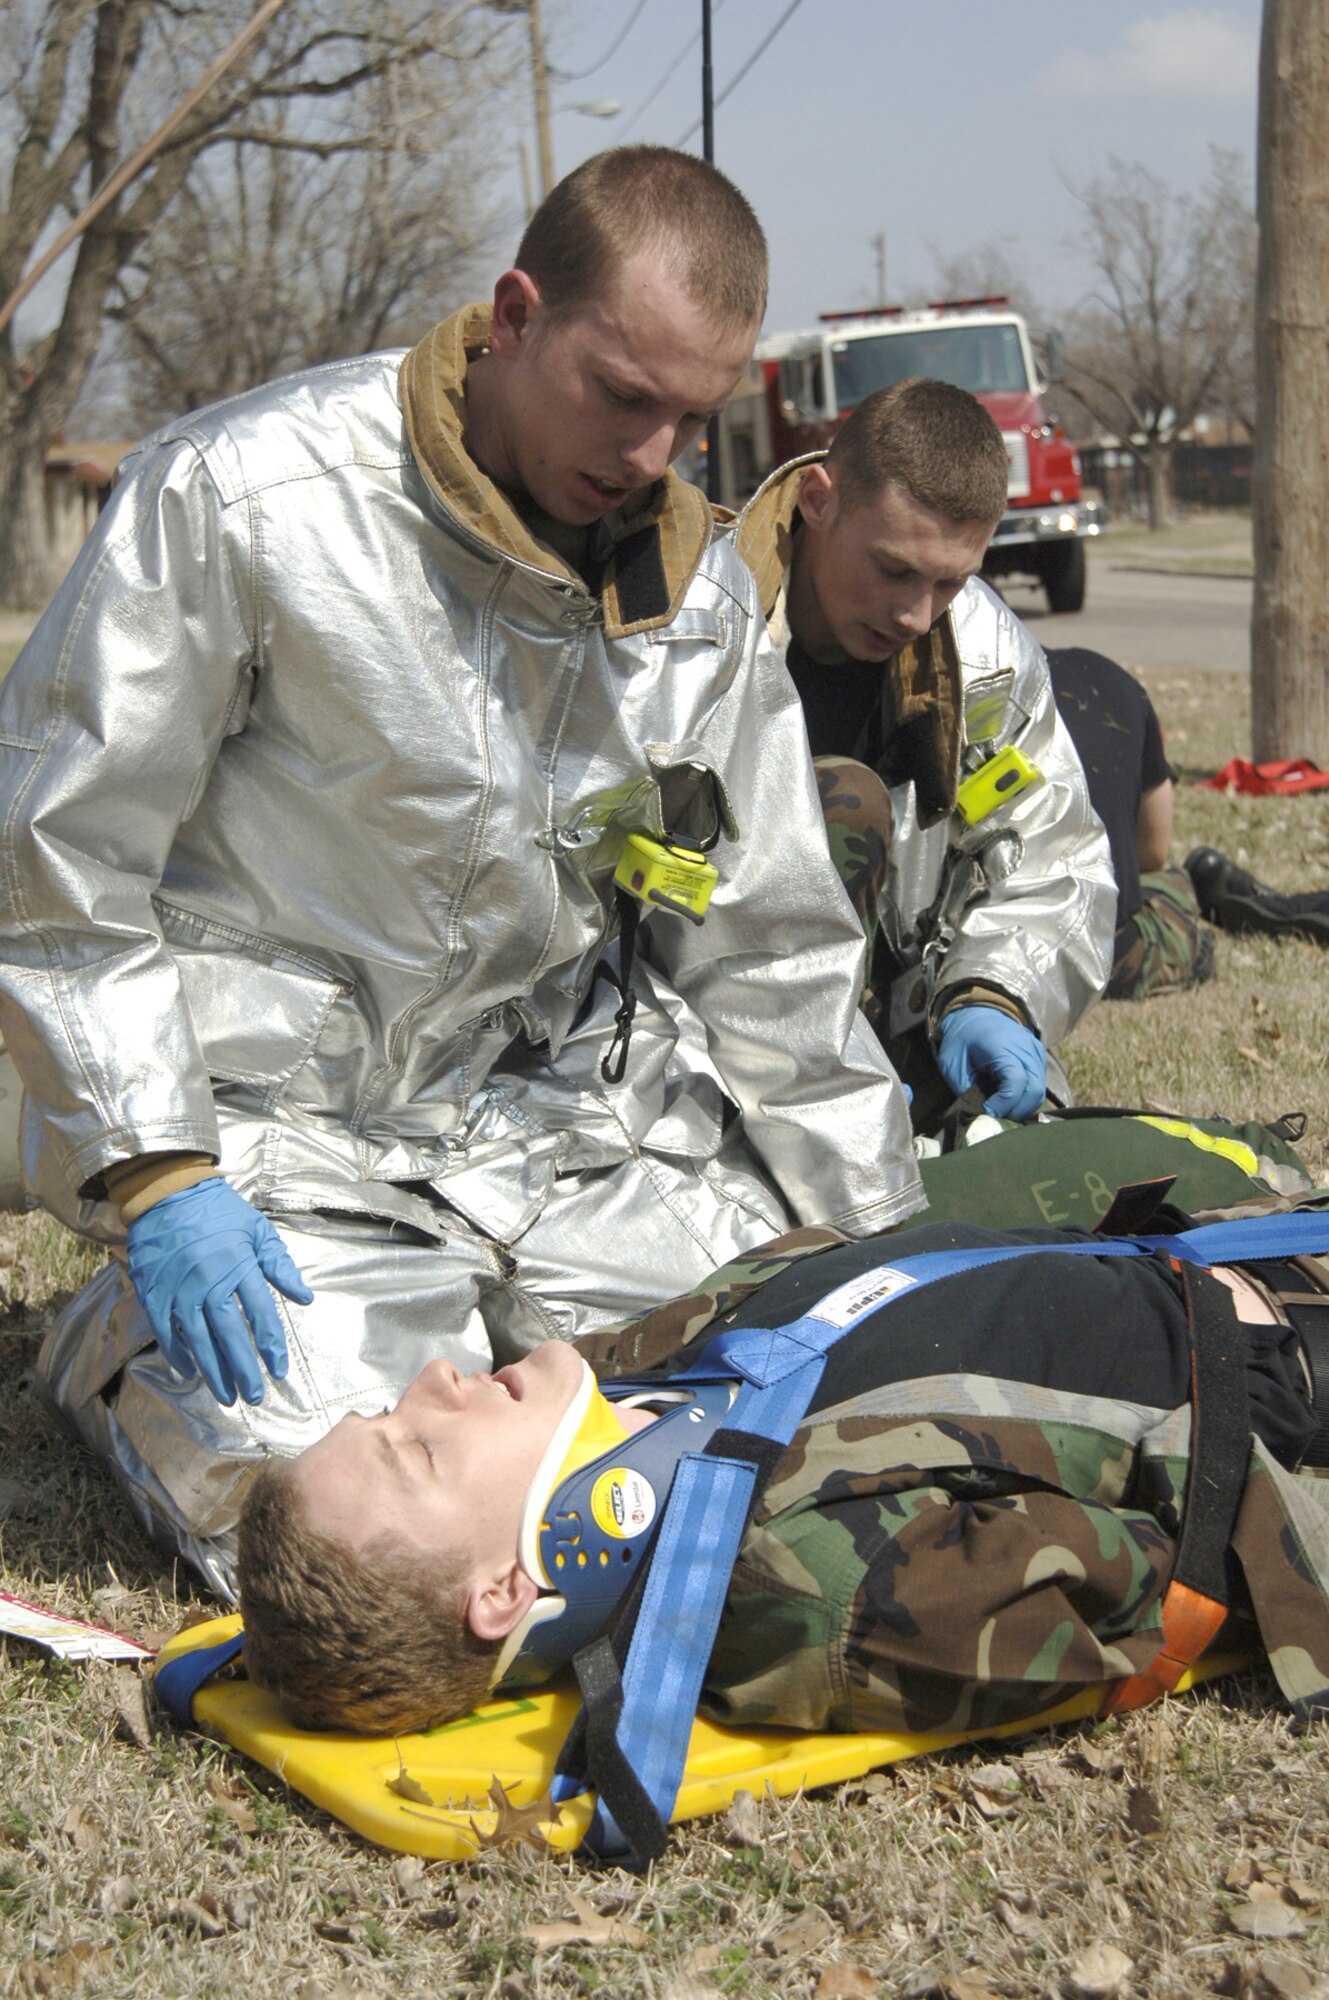 Senior Airman Gregory Godfrey, left, and Senior Airman Cory Brown, right, both 22nd Civil Engineer Squadron firefighters, check a mock tornado victim for injuries March 13 in McConnell's residential area as part of a tornado response exercise. During the exercise, McConnell's exercise evaluation team primarily assessed the effectiveness of the base's emergency notification systems. The EET also evaluated Team McConnell members' ability to shelter-in-place and each unit's capability to account for its members in an emergency situation. (Air Force photo by Airman 1st Class Roy Lynch)